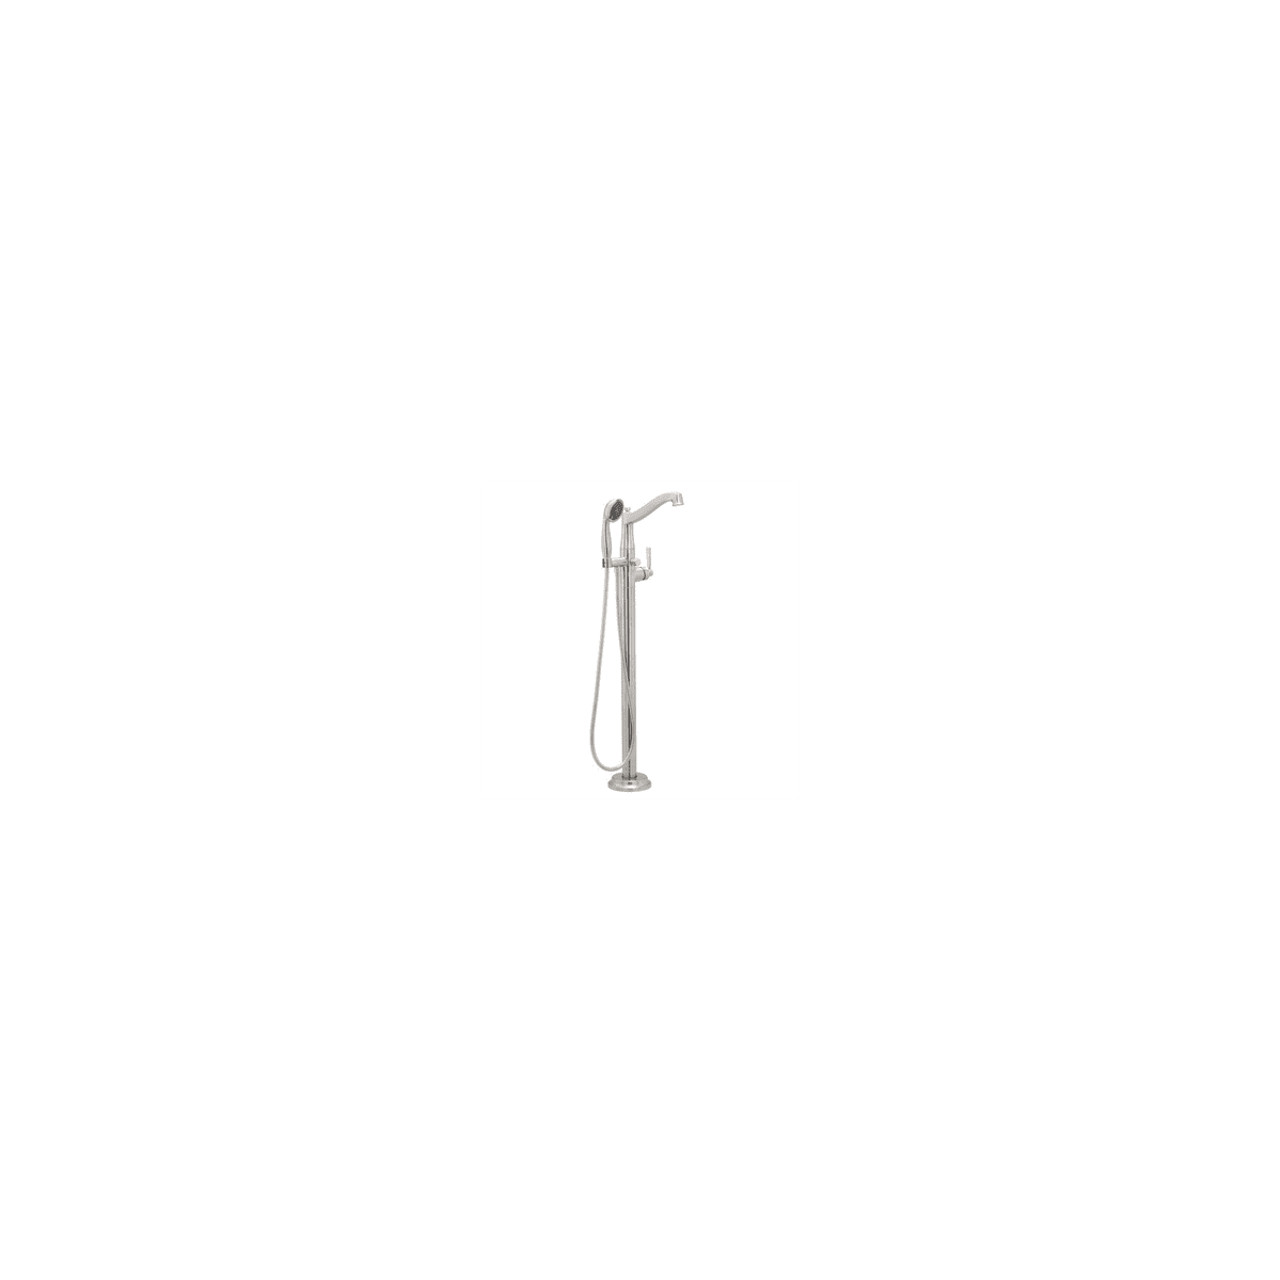 Mirabelle Floor Mounted Tub Filler - Includes 1.8 GPM Hand Shower SHPTFS1000GPN